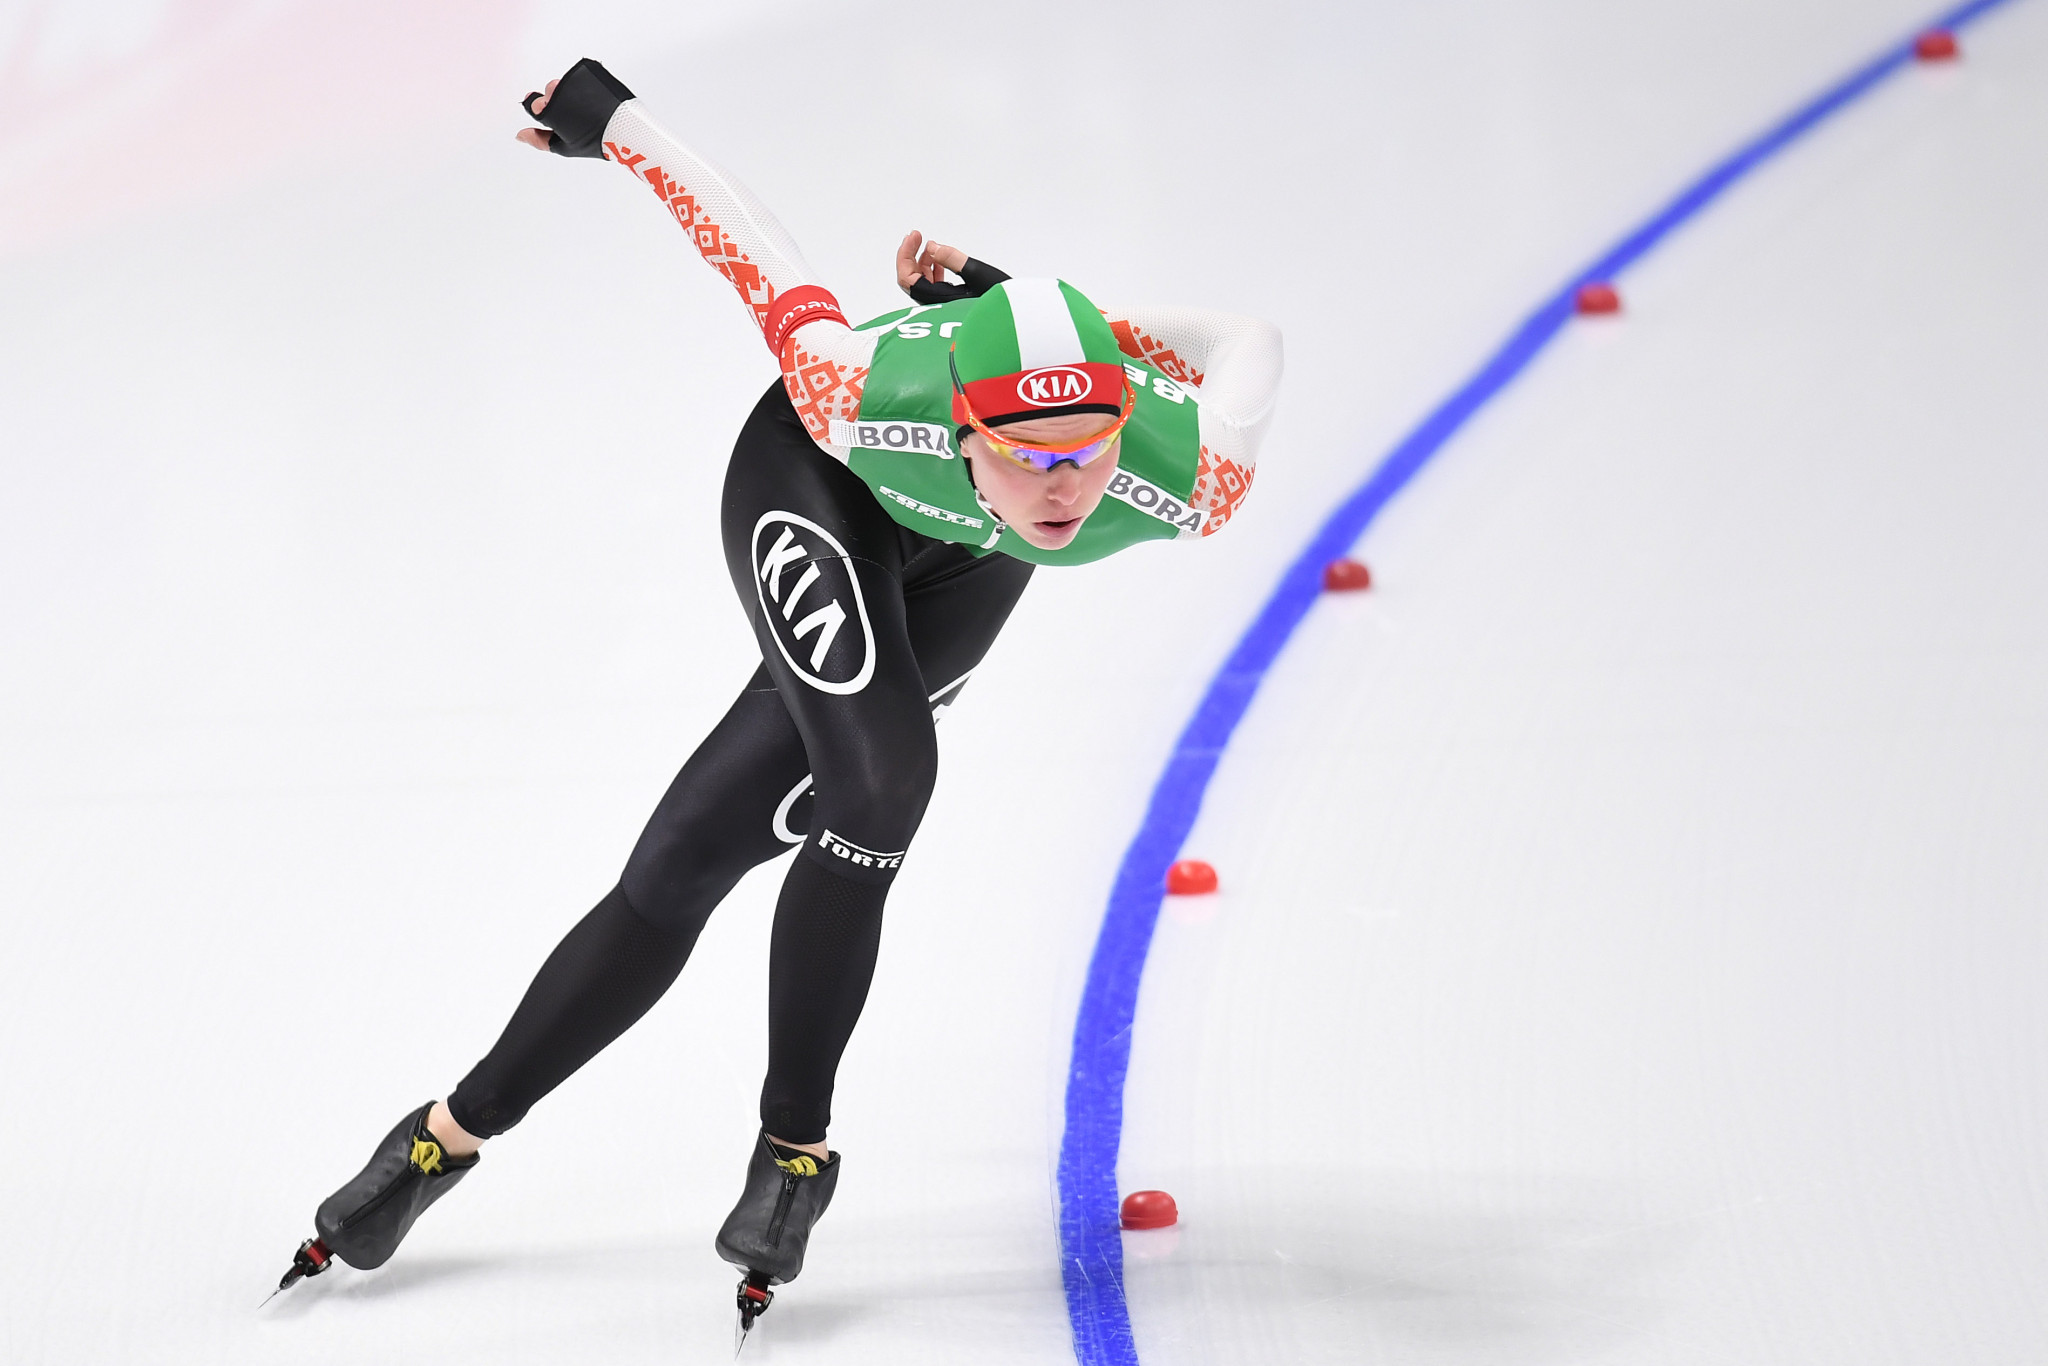 Belarus' Marina Zueva will aim to impress in front of a home crowd at the opening ISU Speed Skating World Cup event of the new season in Minsk ©Getty Images